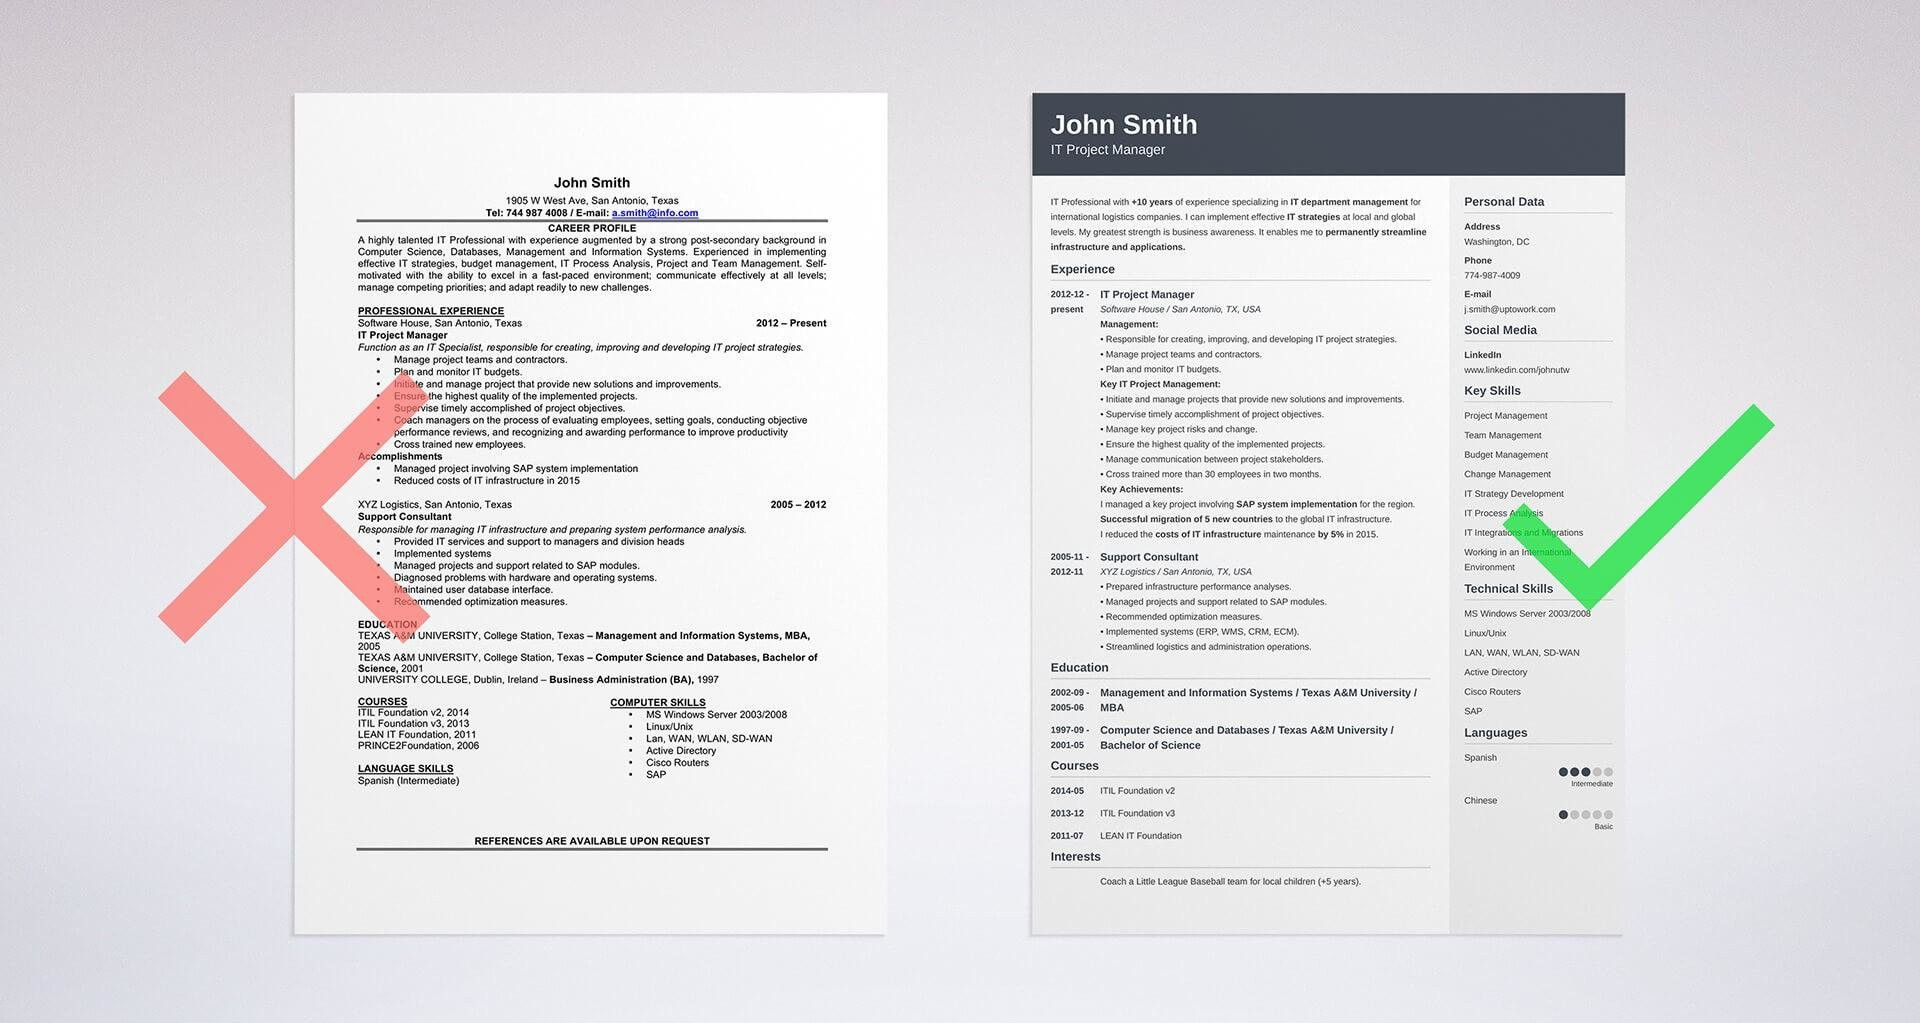 Sample Resume with A Section On Accomplishments Accomplishments for A Resume: Key Achievements & Awards